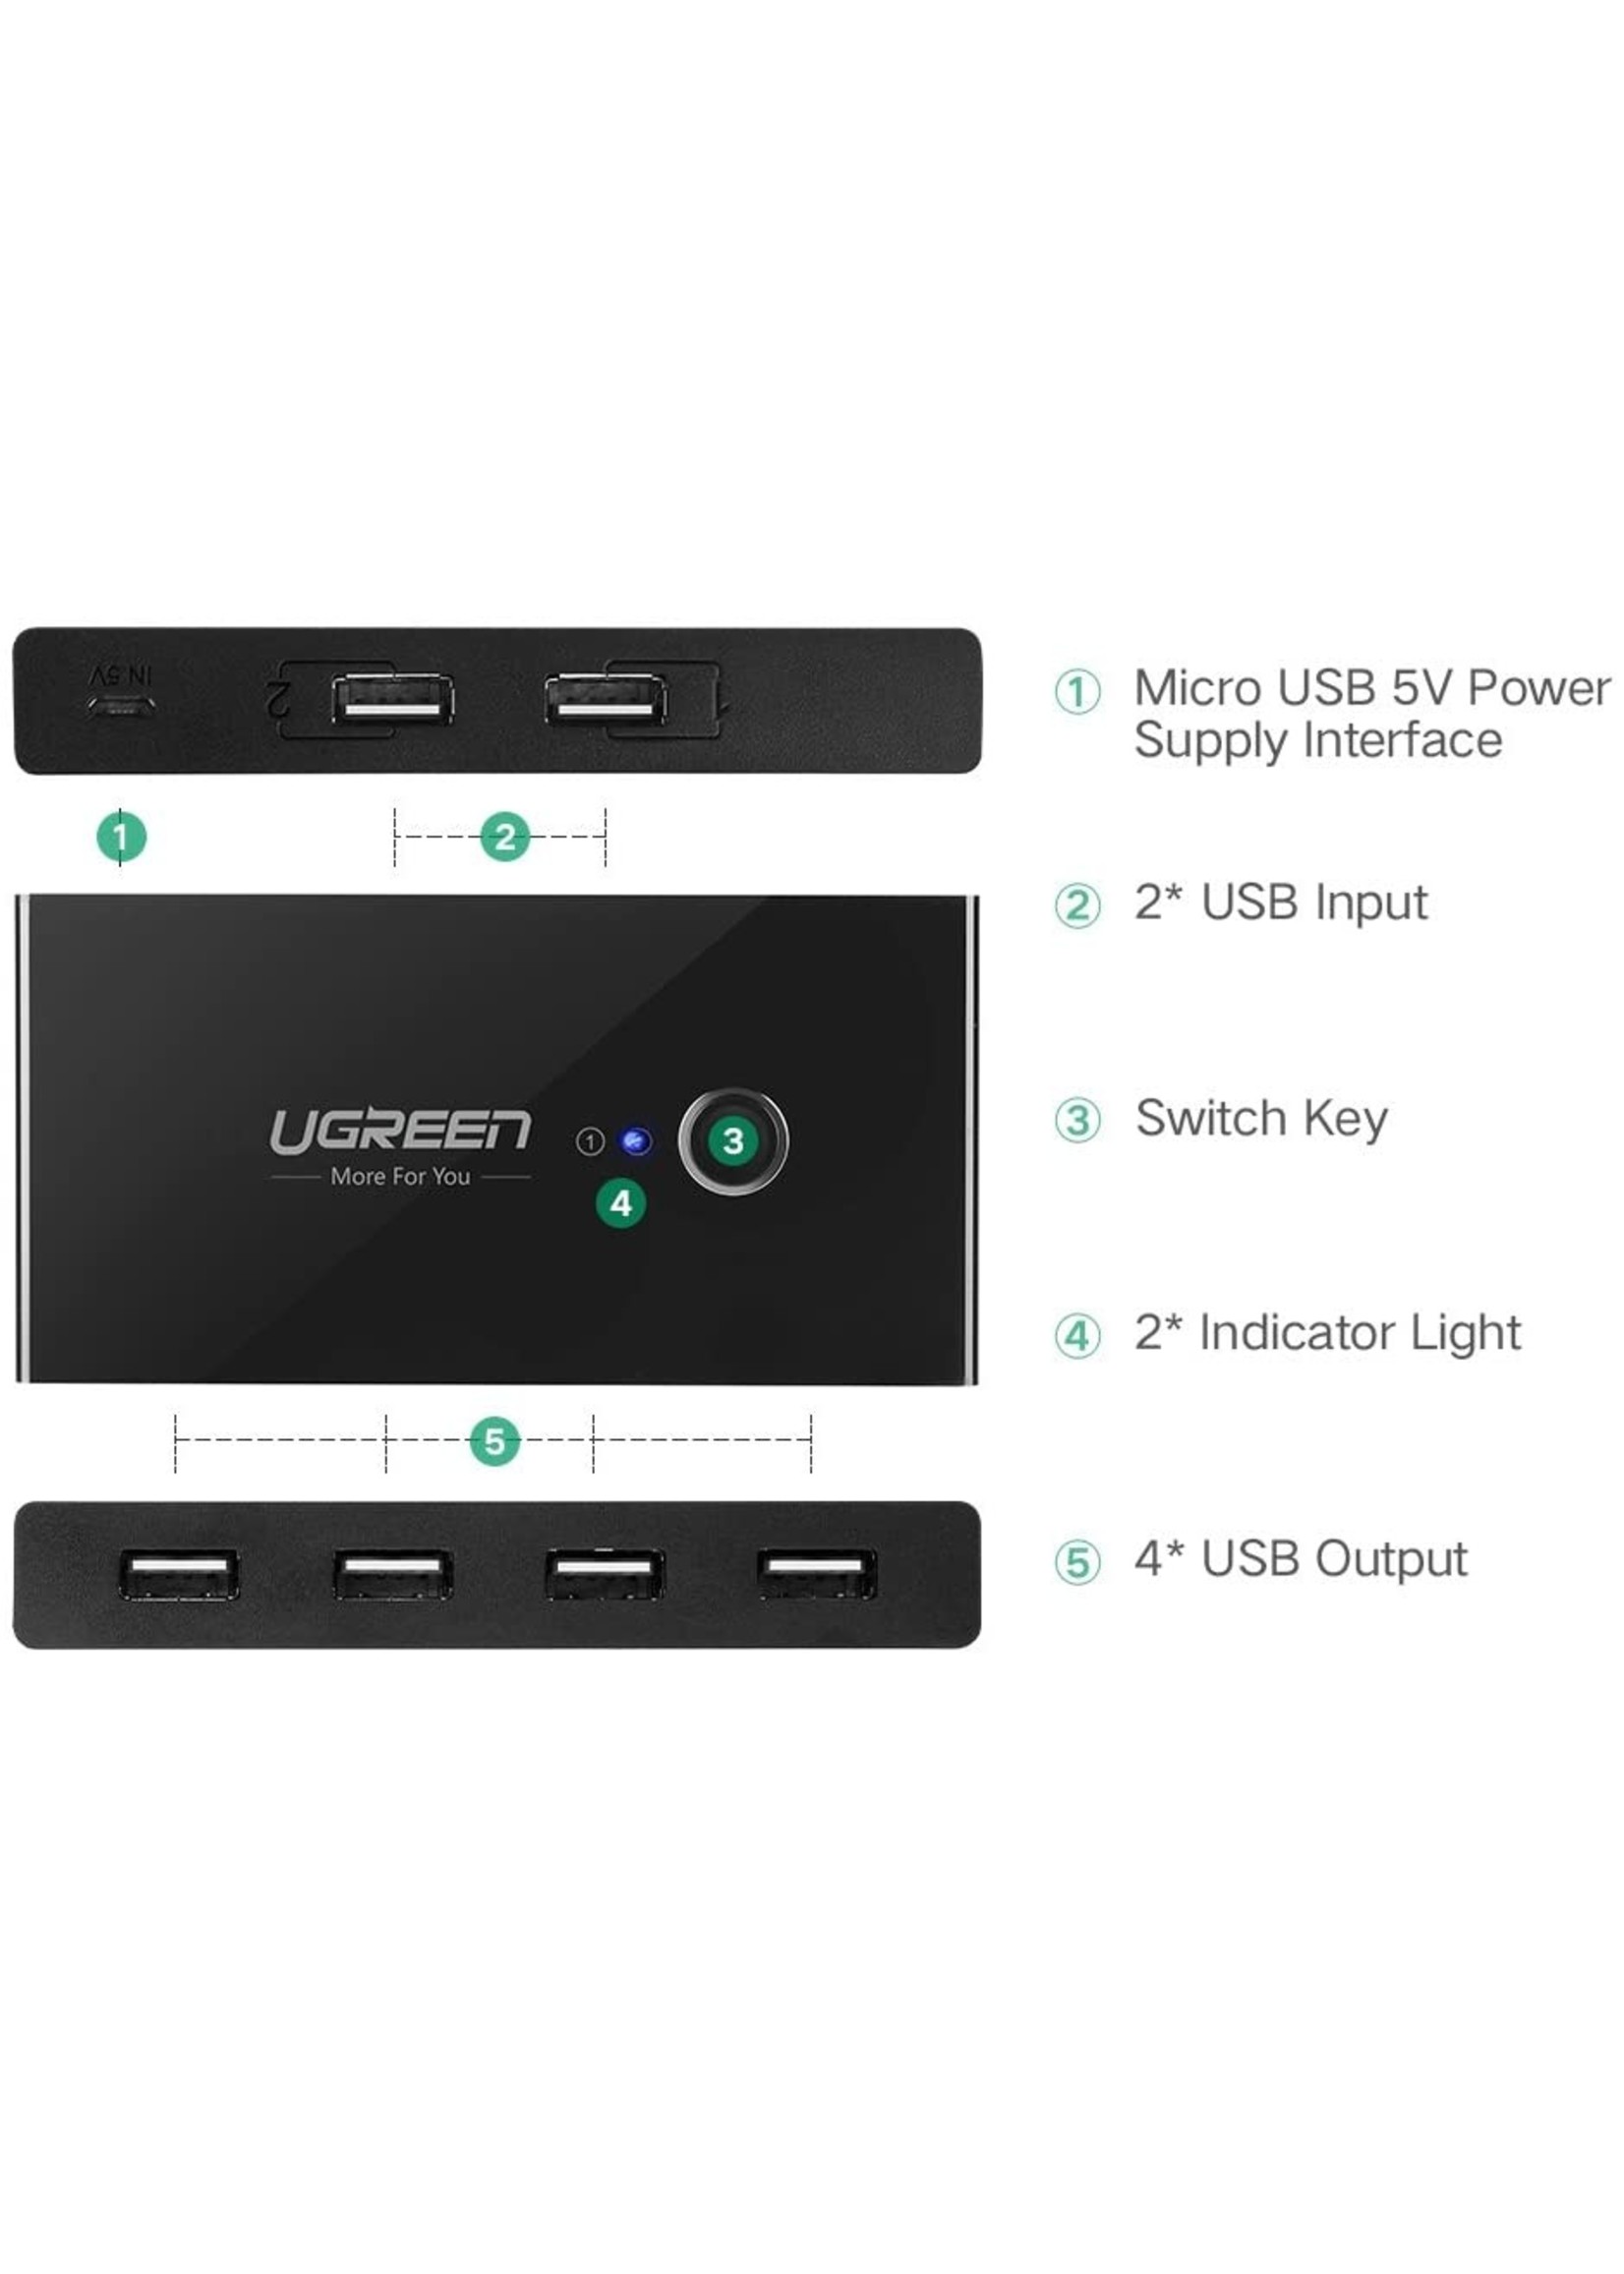 UGREEN USB 2.0 sharing switch with 4 ports - black